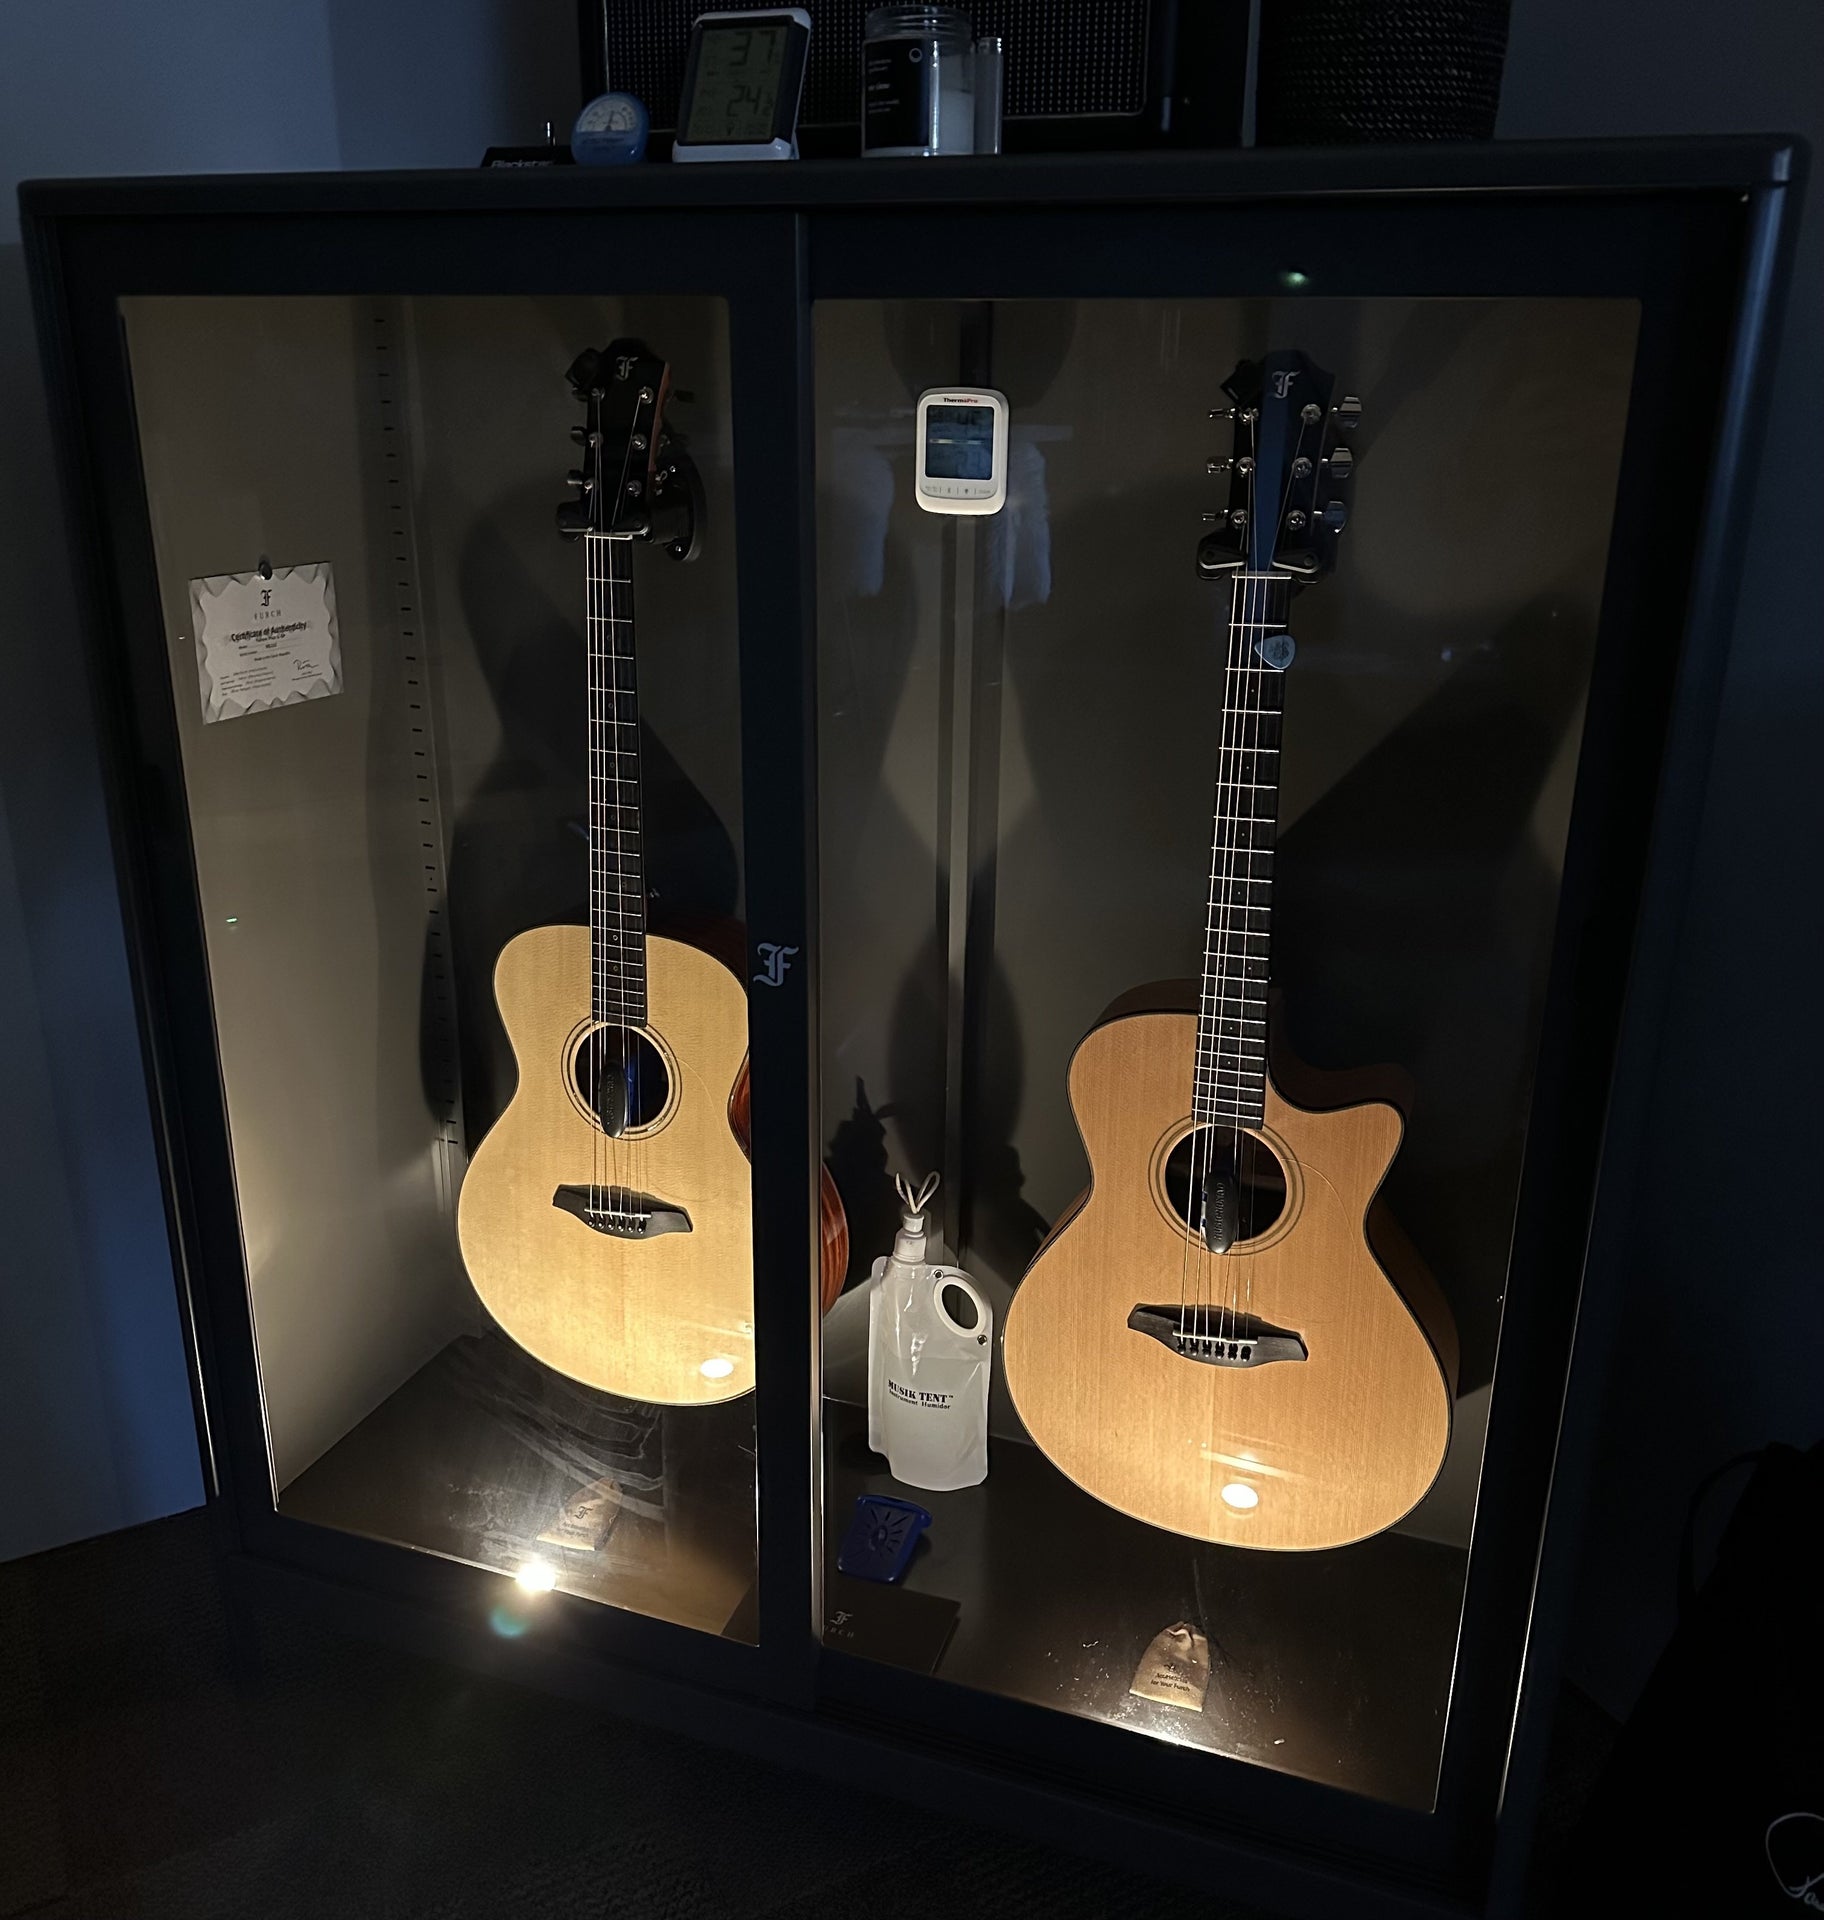 Where do you put your humidifier? - The Acoustic Guitar Forum